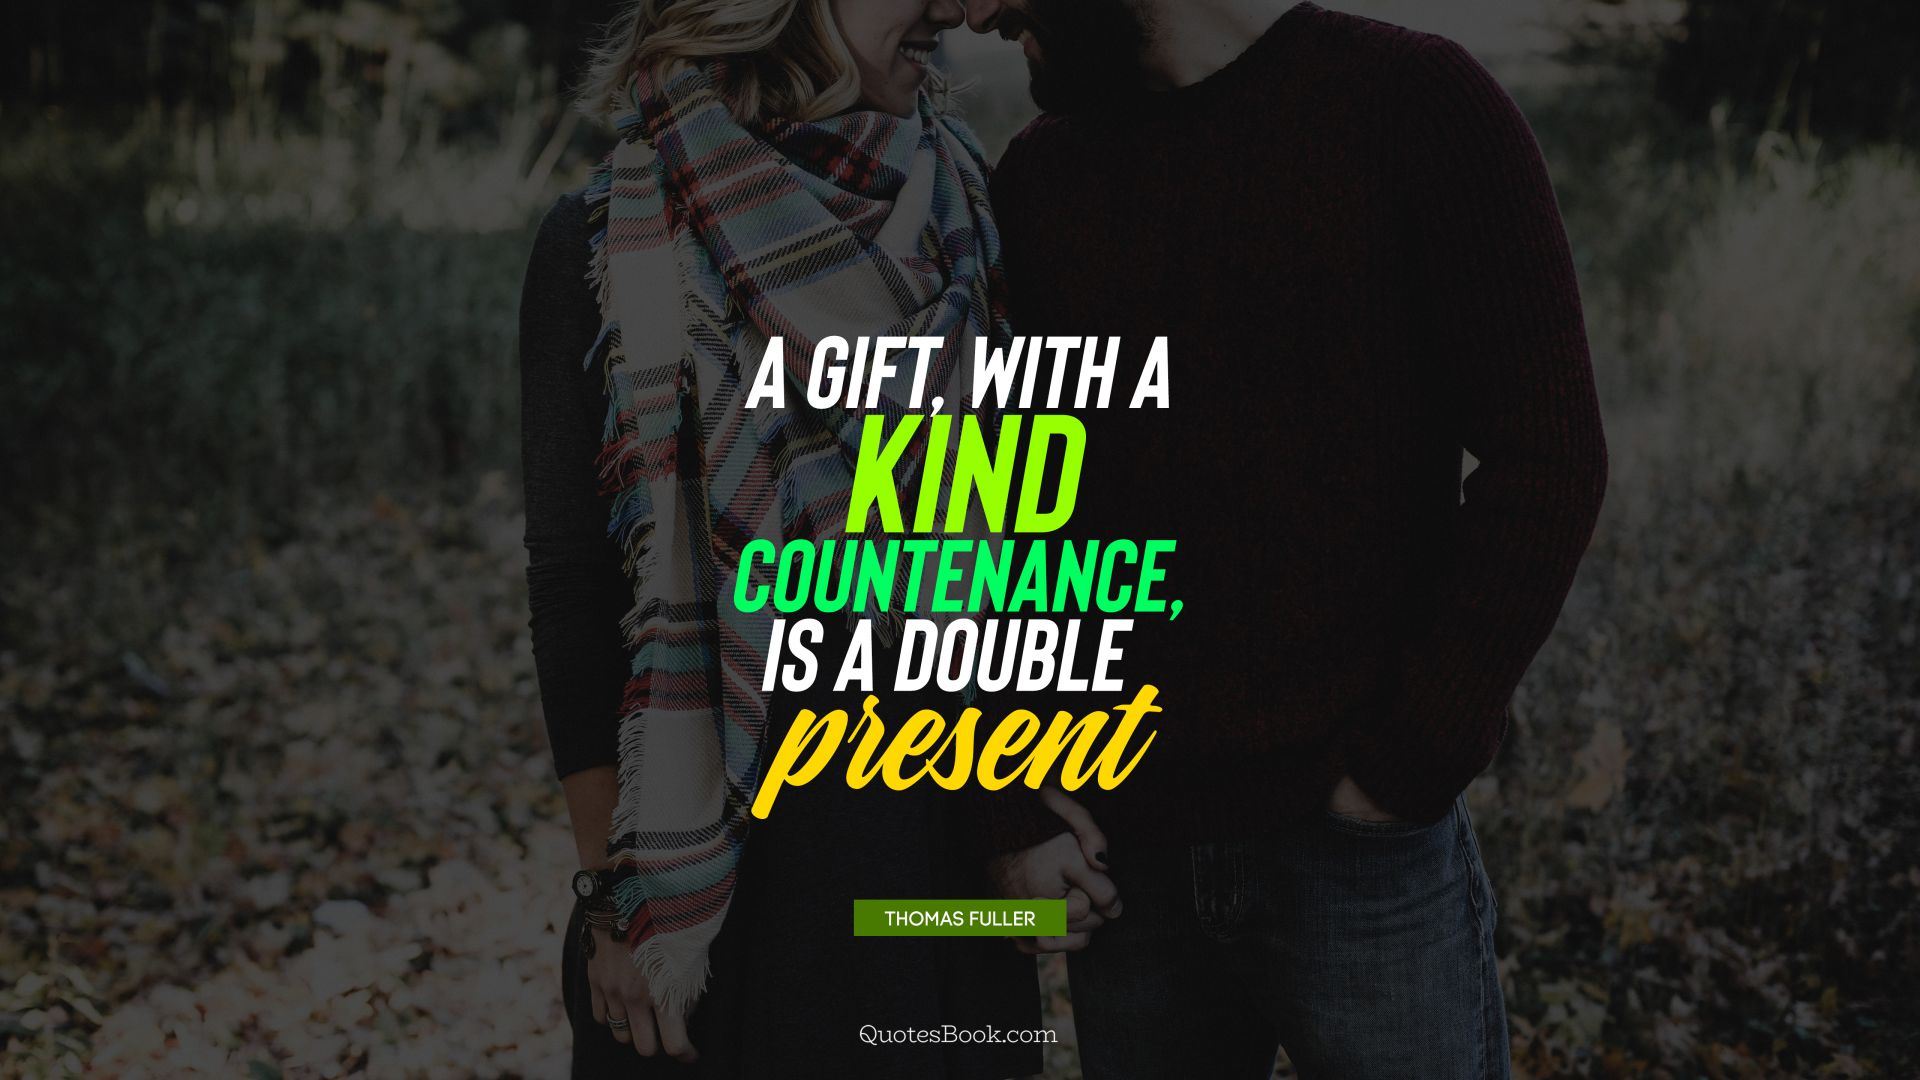 A gift, with a kind countenance, is a double present. - Quote by Thomas Fuller